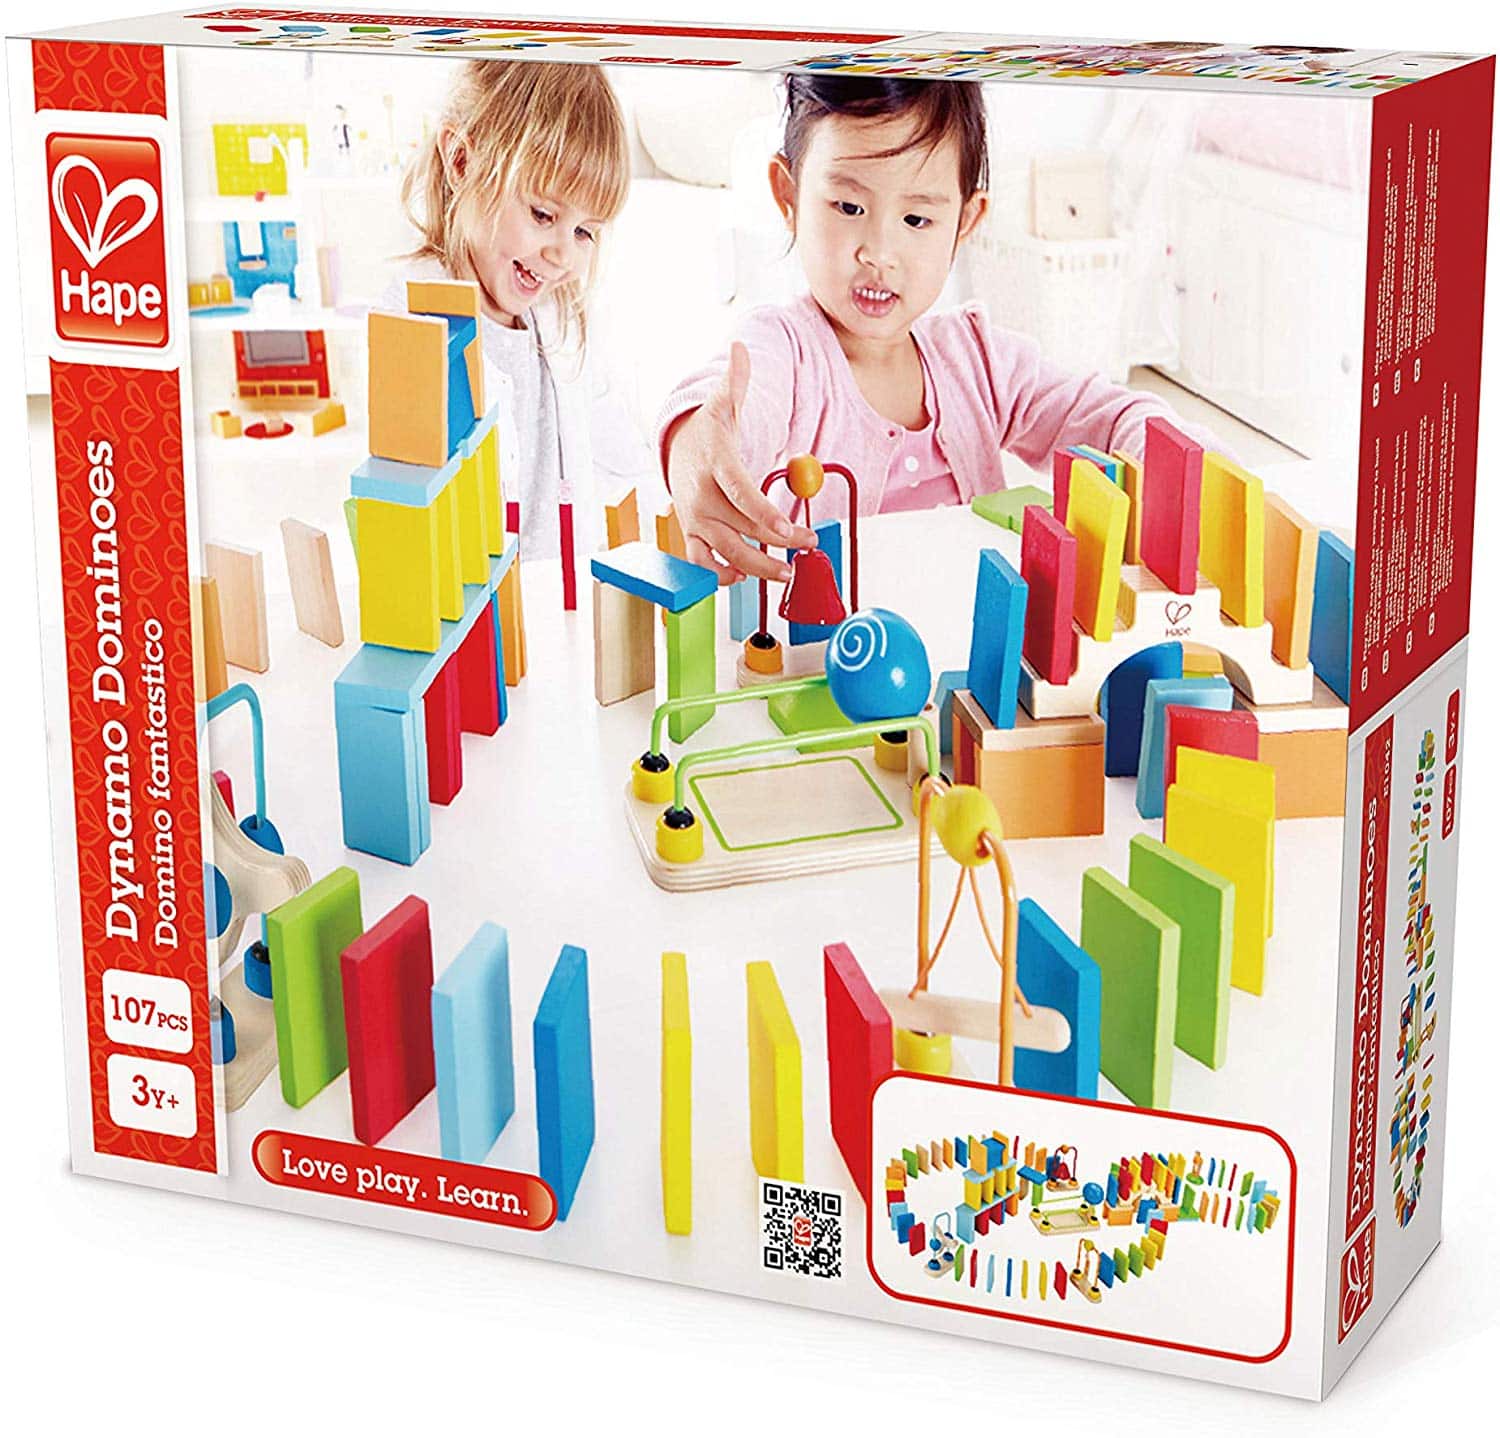 stem toys for 8 year olds